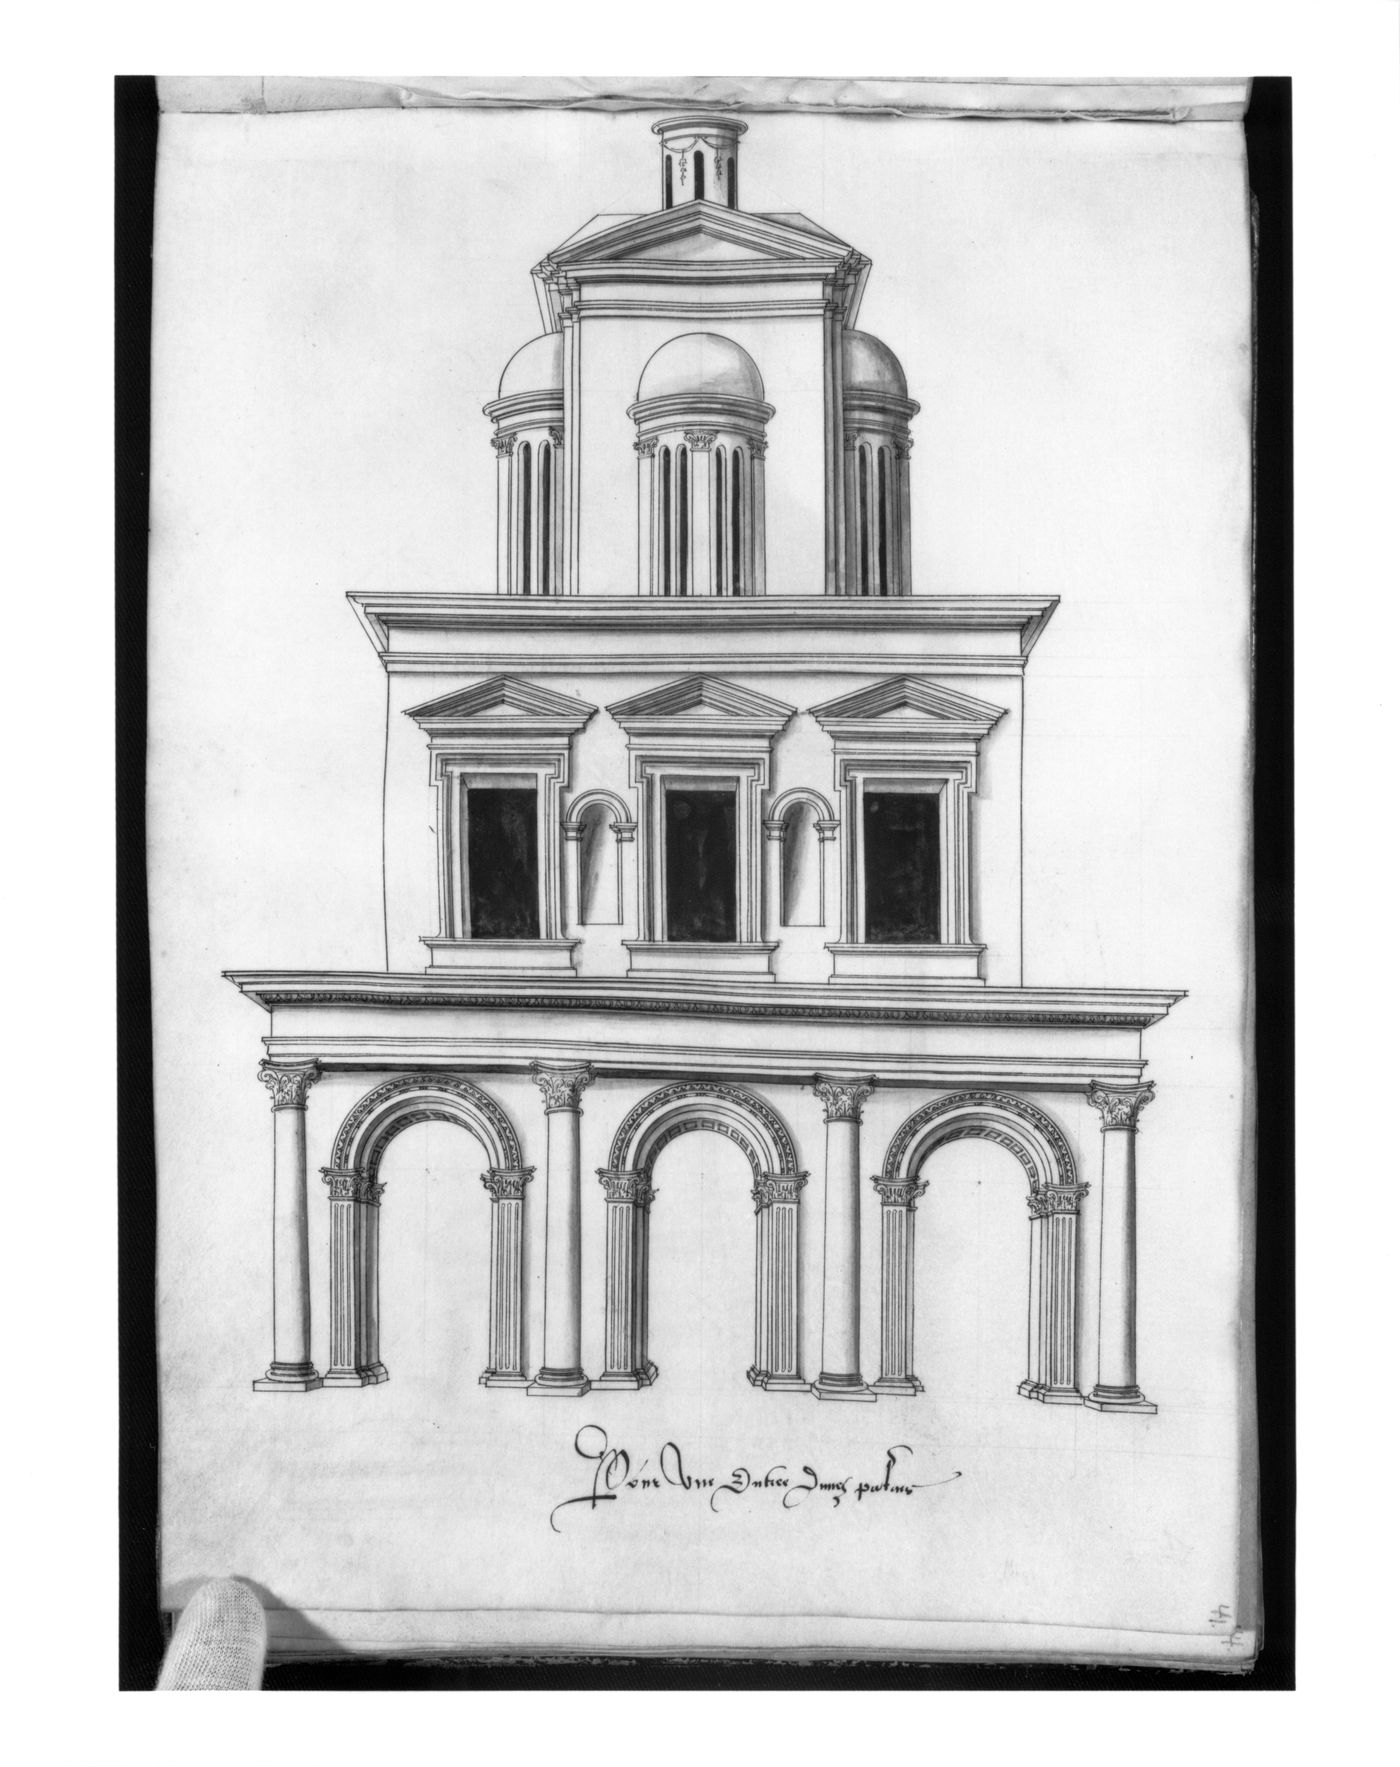 Design for an entrance to a palace